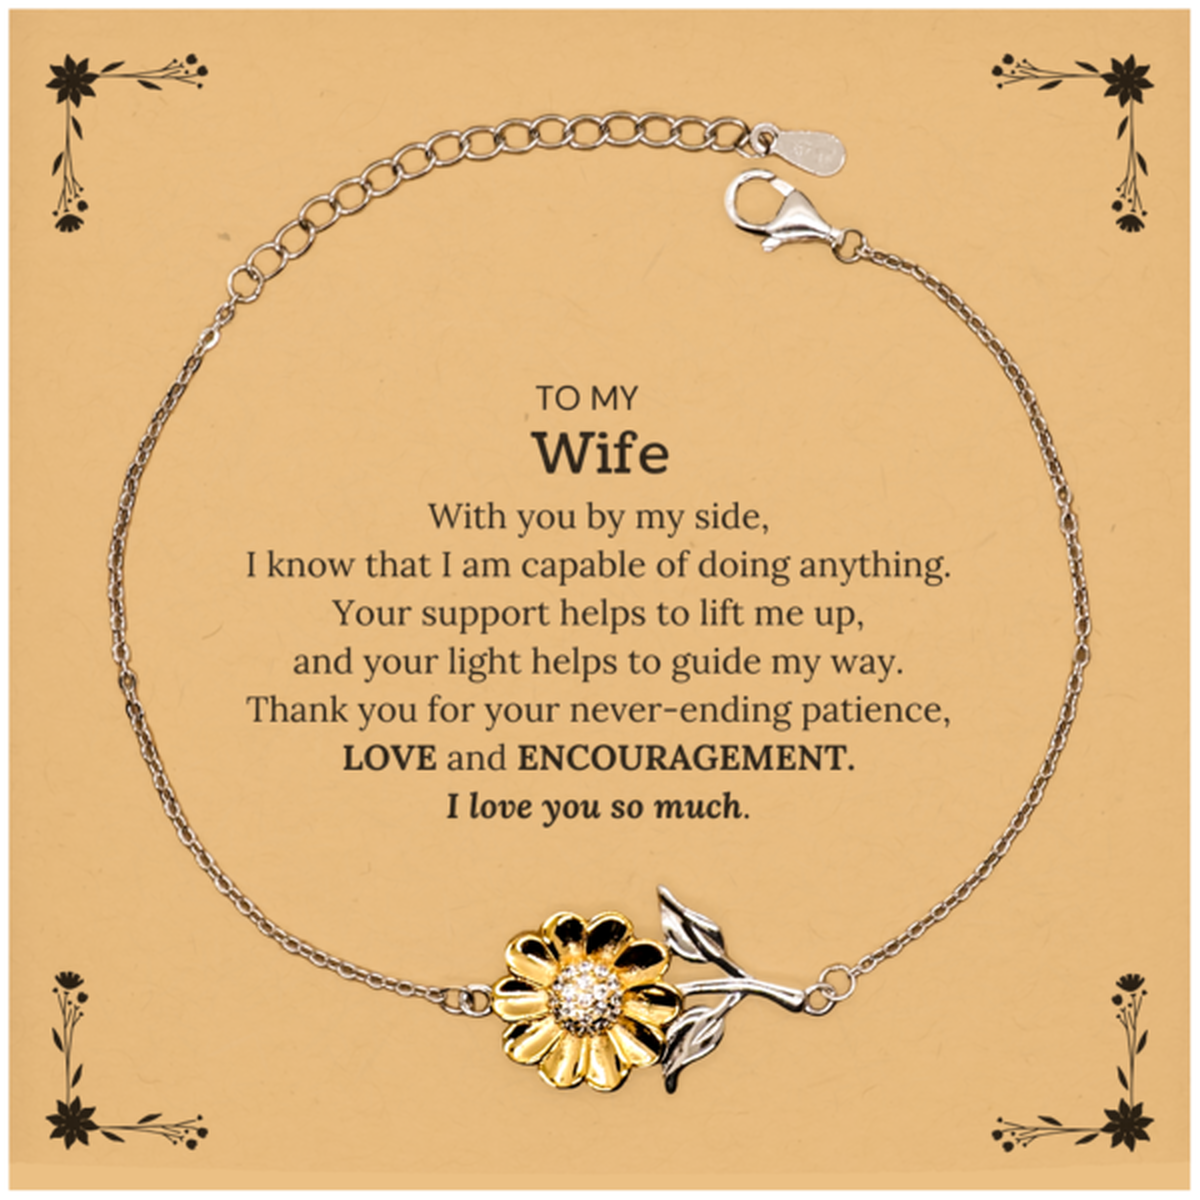 Appreciation Wife Sunflower Bracelet Gifts, To My Wife Birthday Christmas Wedding Keepsake Gifts for Wife With you by my side, I know that I am capable of doing anything. I love you so much